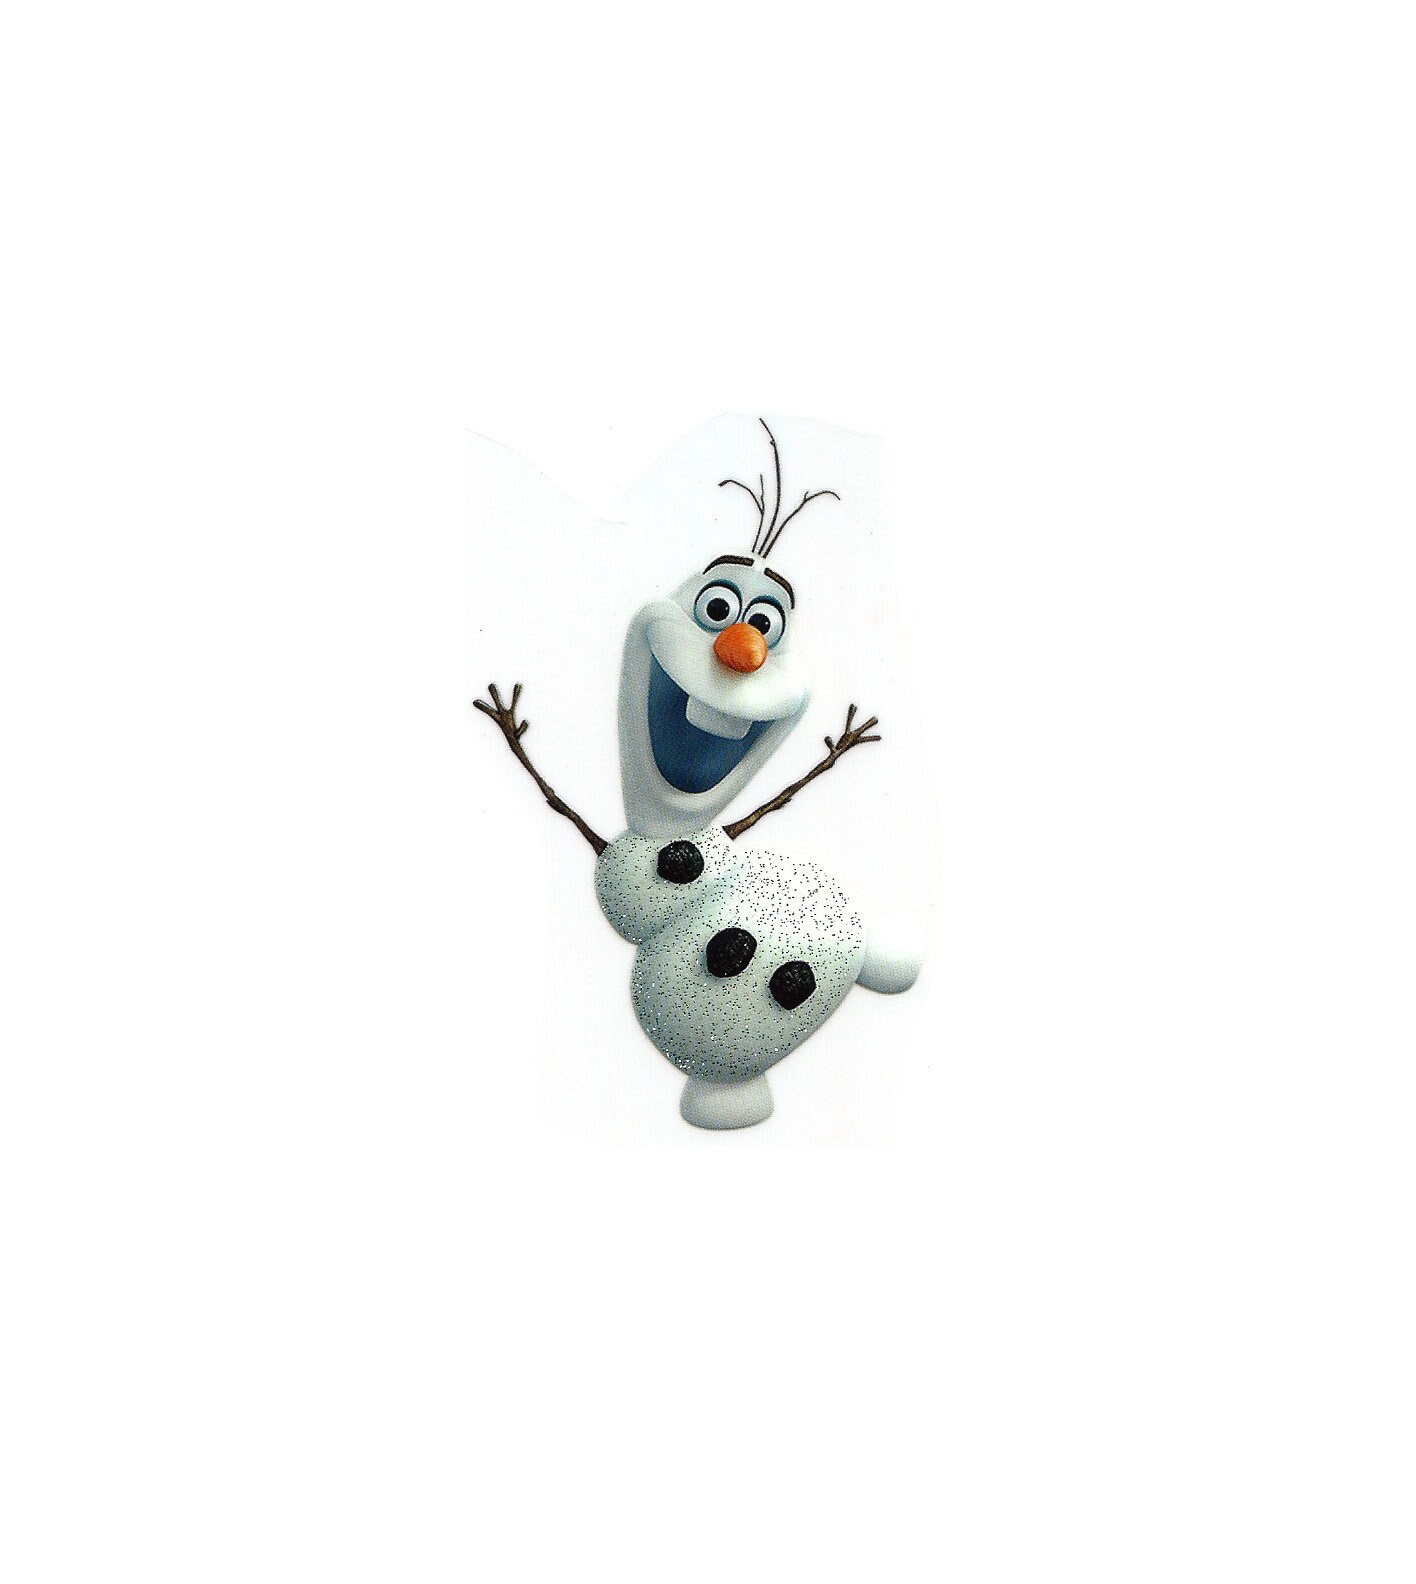 FROZEN OLAF SNOW MAN NECKLACE 22 INCH PENDENT CHARM GIFT BOX BIRTHDAY PARTY 